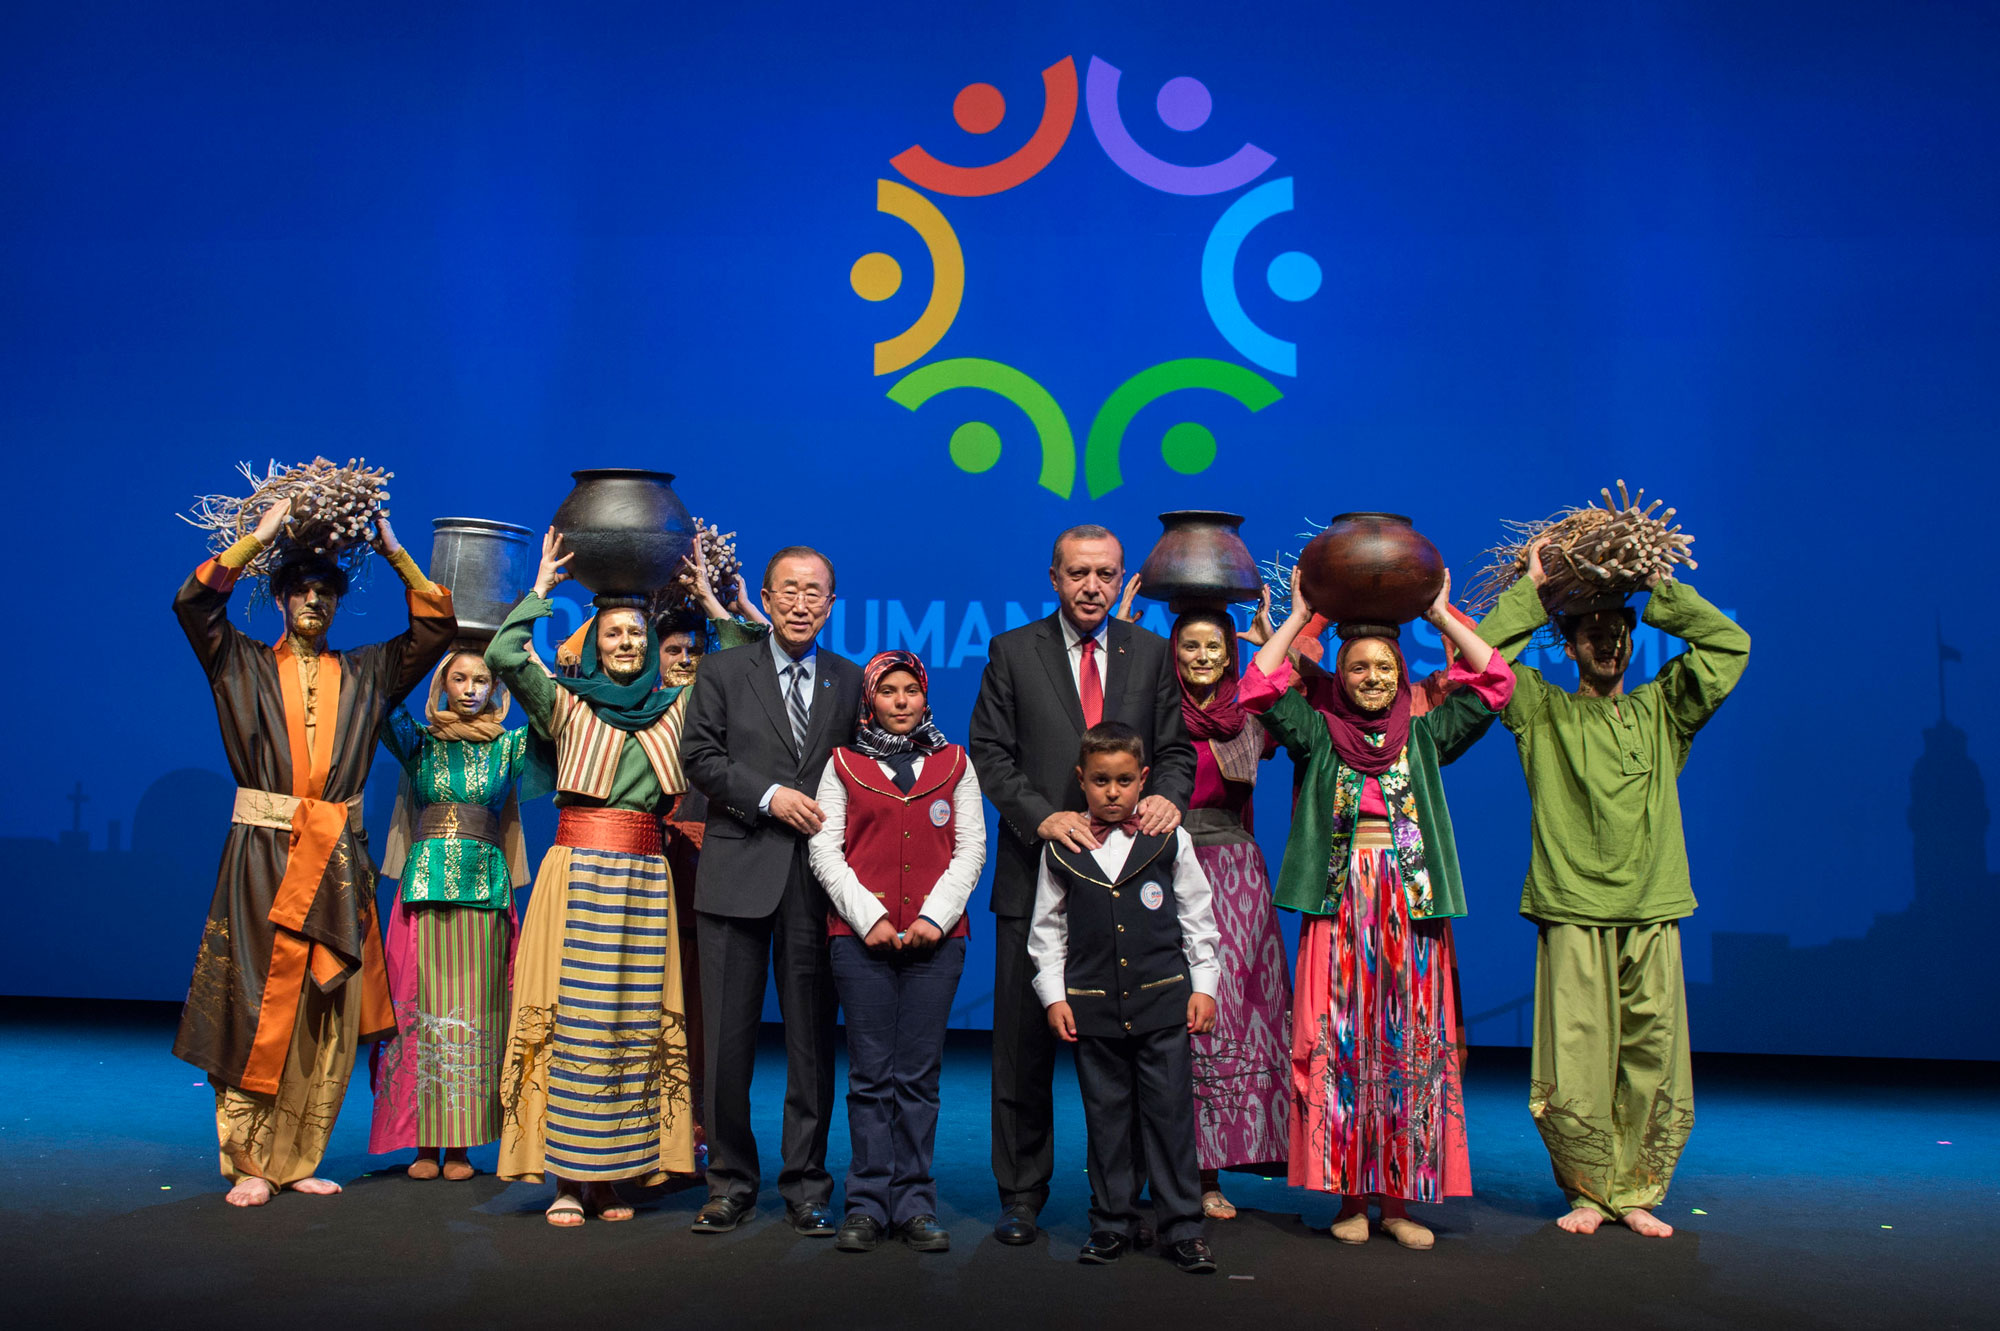 Secretary-General along with President of Turkey at Closing Ceremony of the World Humanitarian Summit.